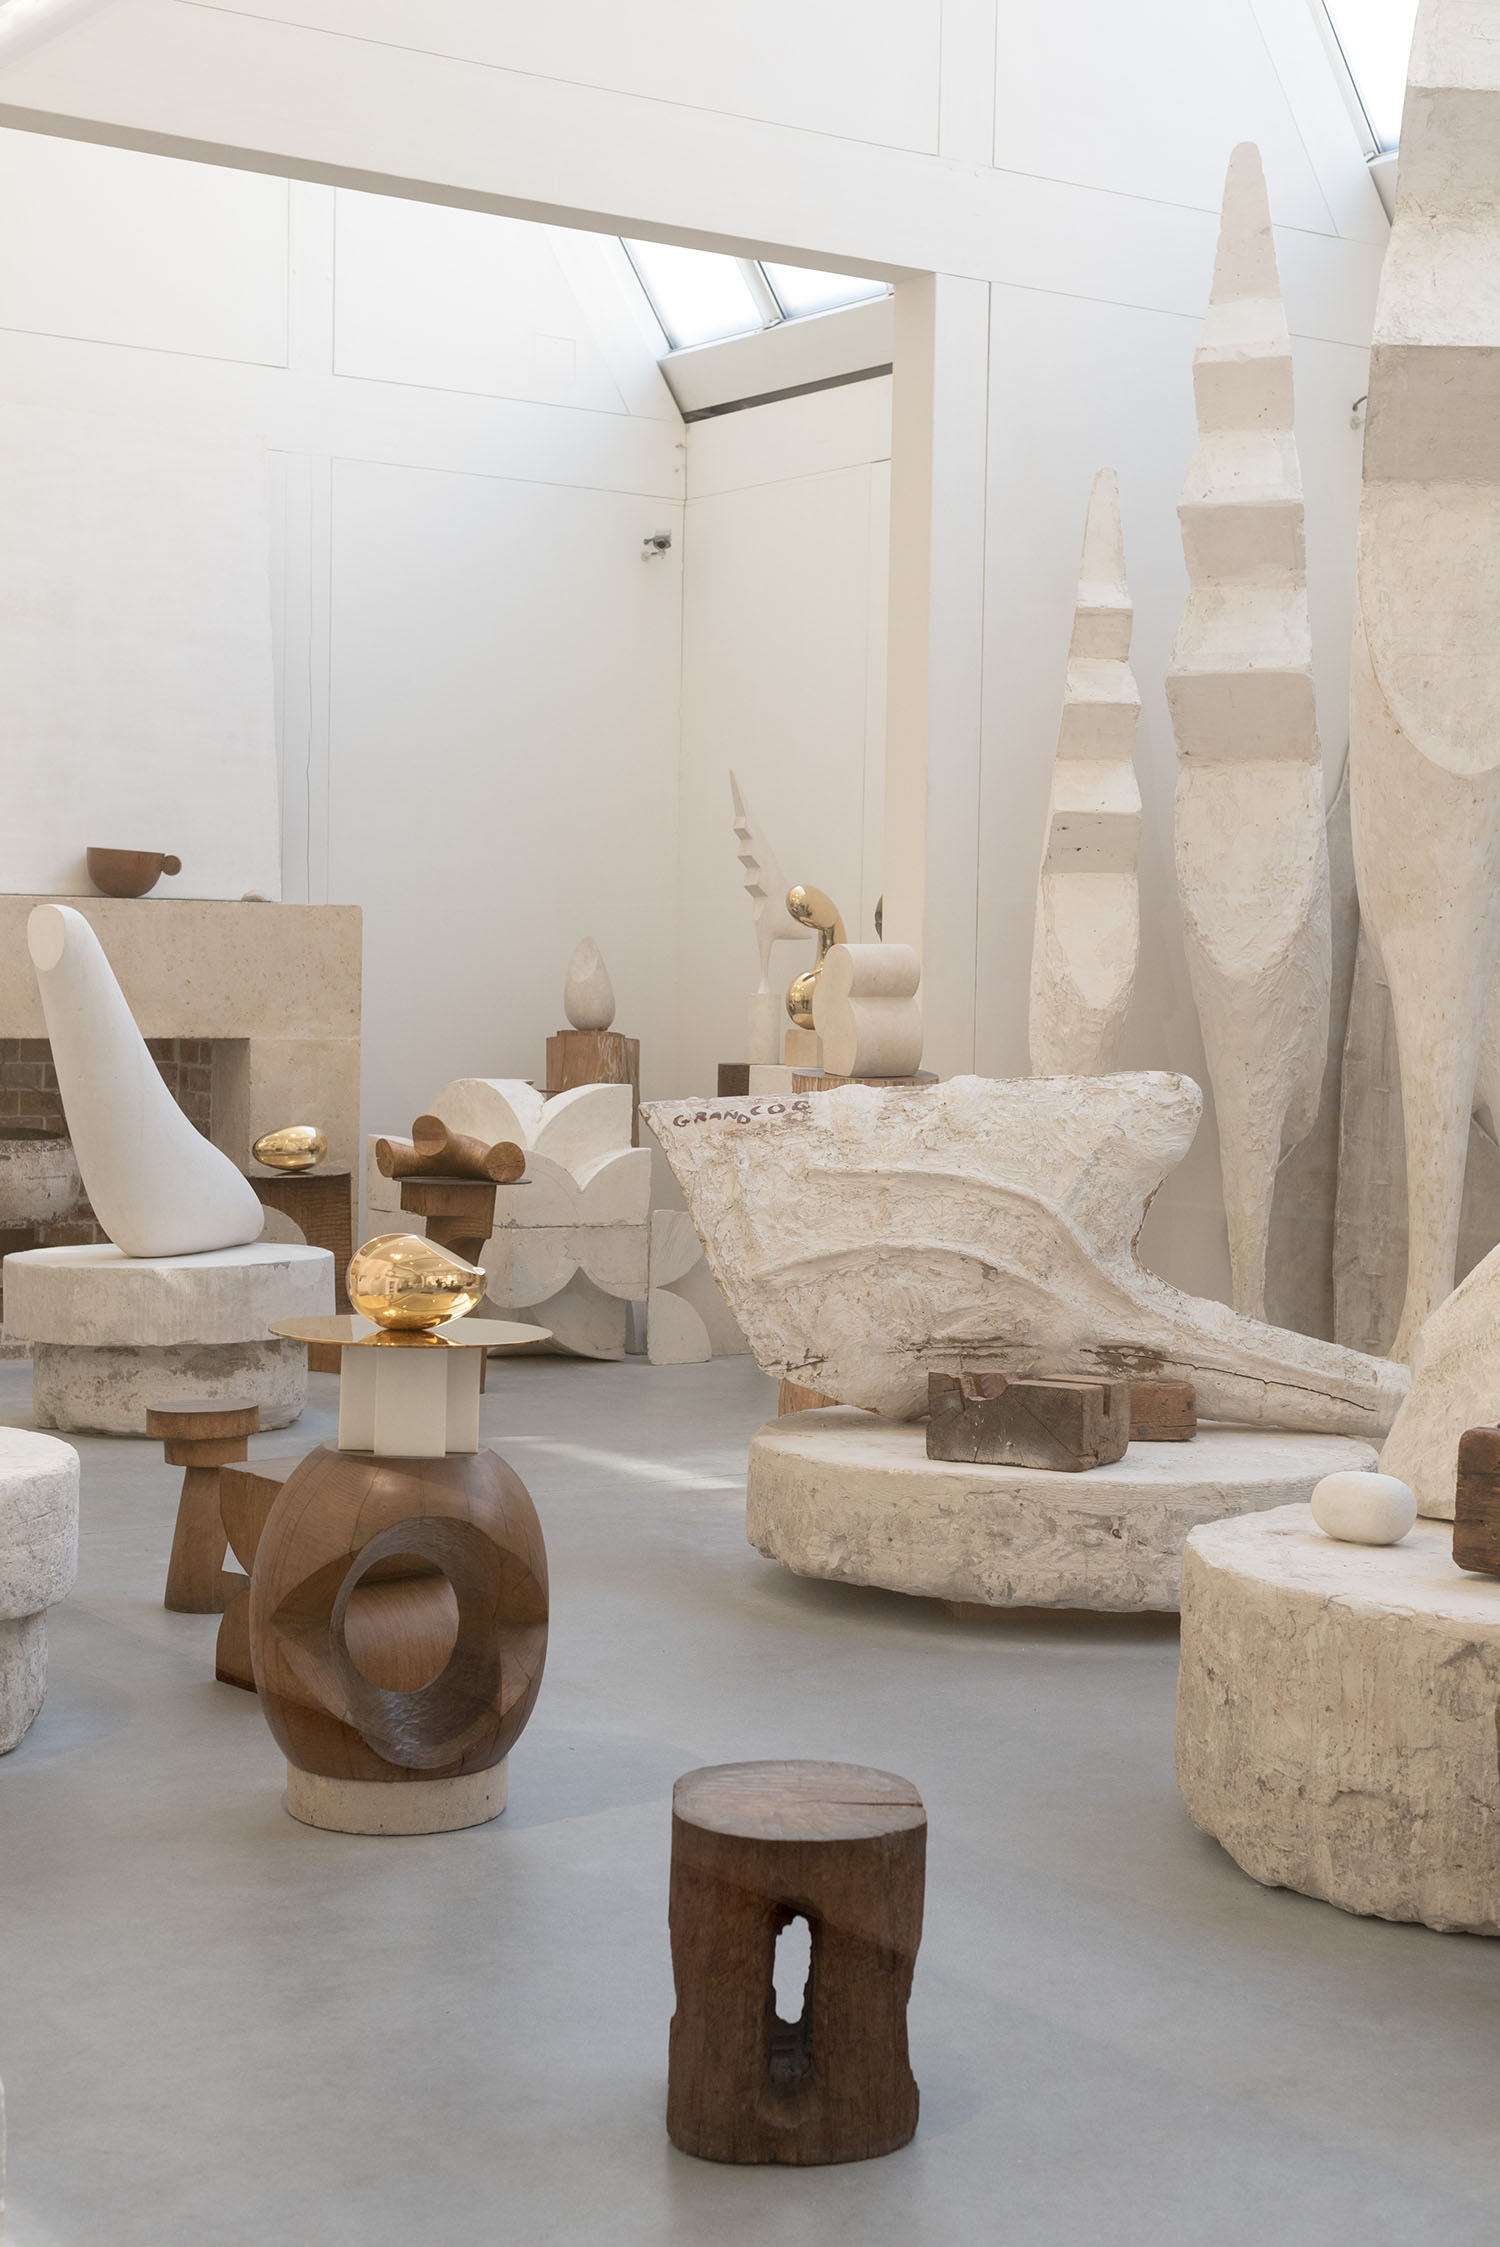 Marble and wooden sculptures in Atelier Brancusi at Centre Pompidou, as photographed by top Canadian travel blogger Cee Fardoe of Coco & Vera